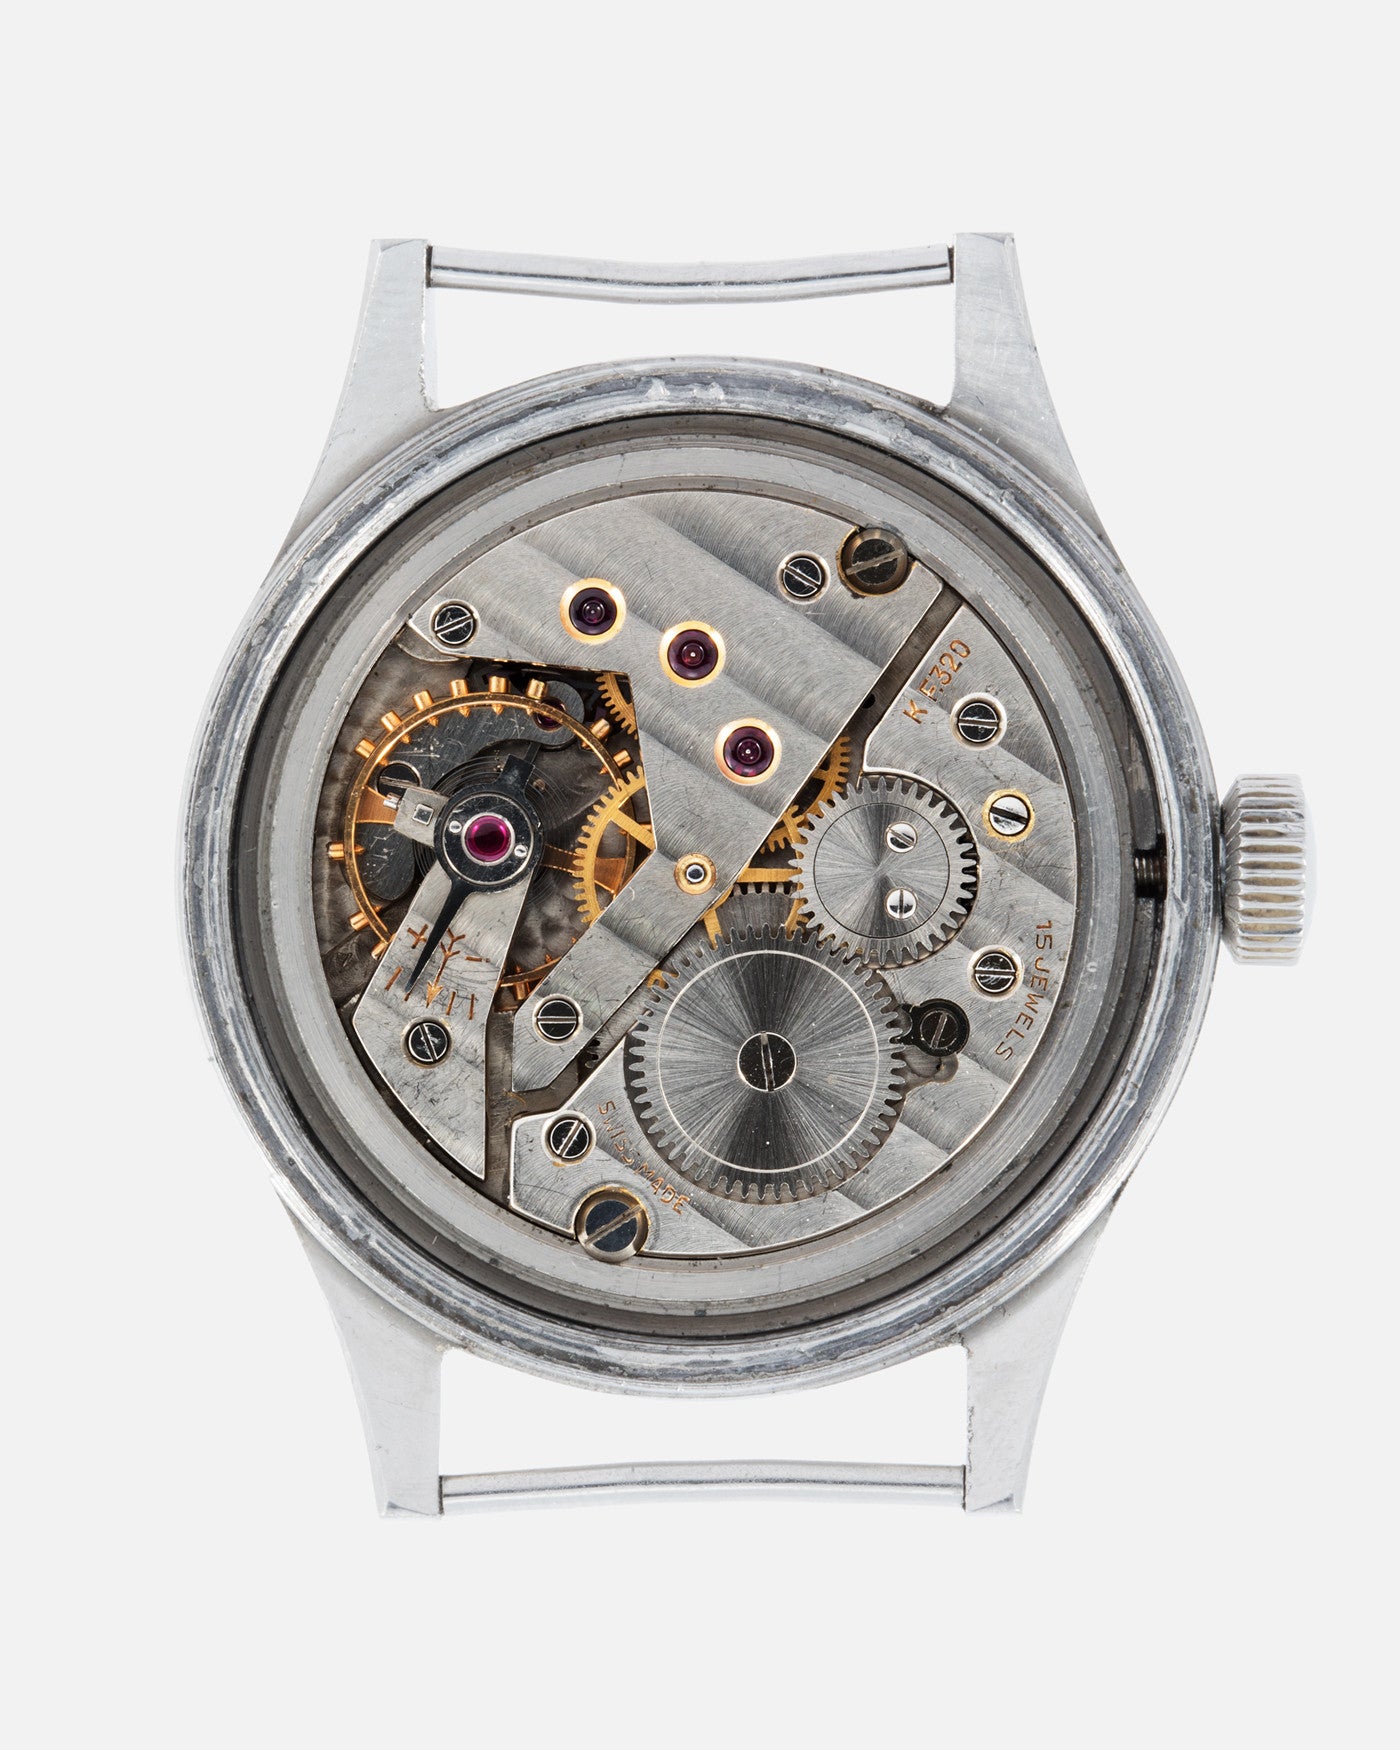 Grana Watch a Brief And Interesting History Of The Brand